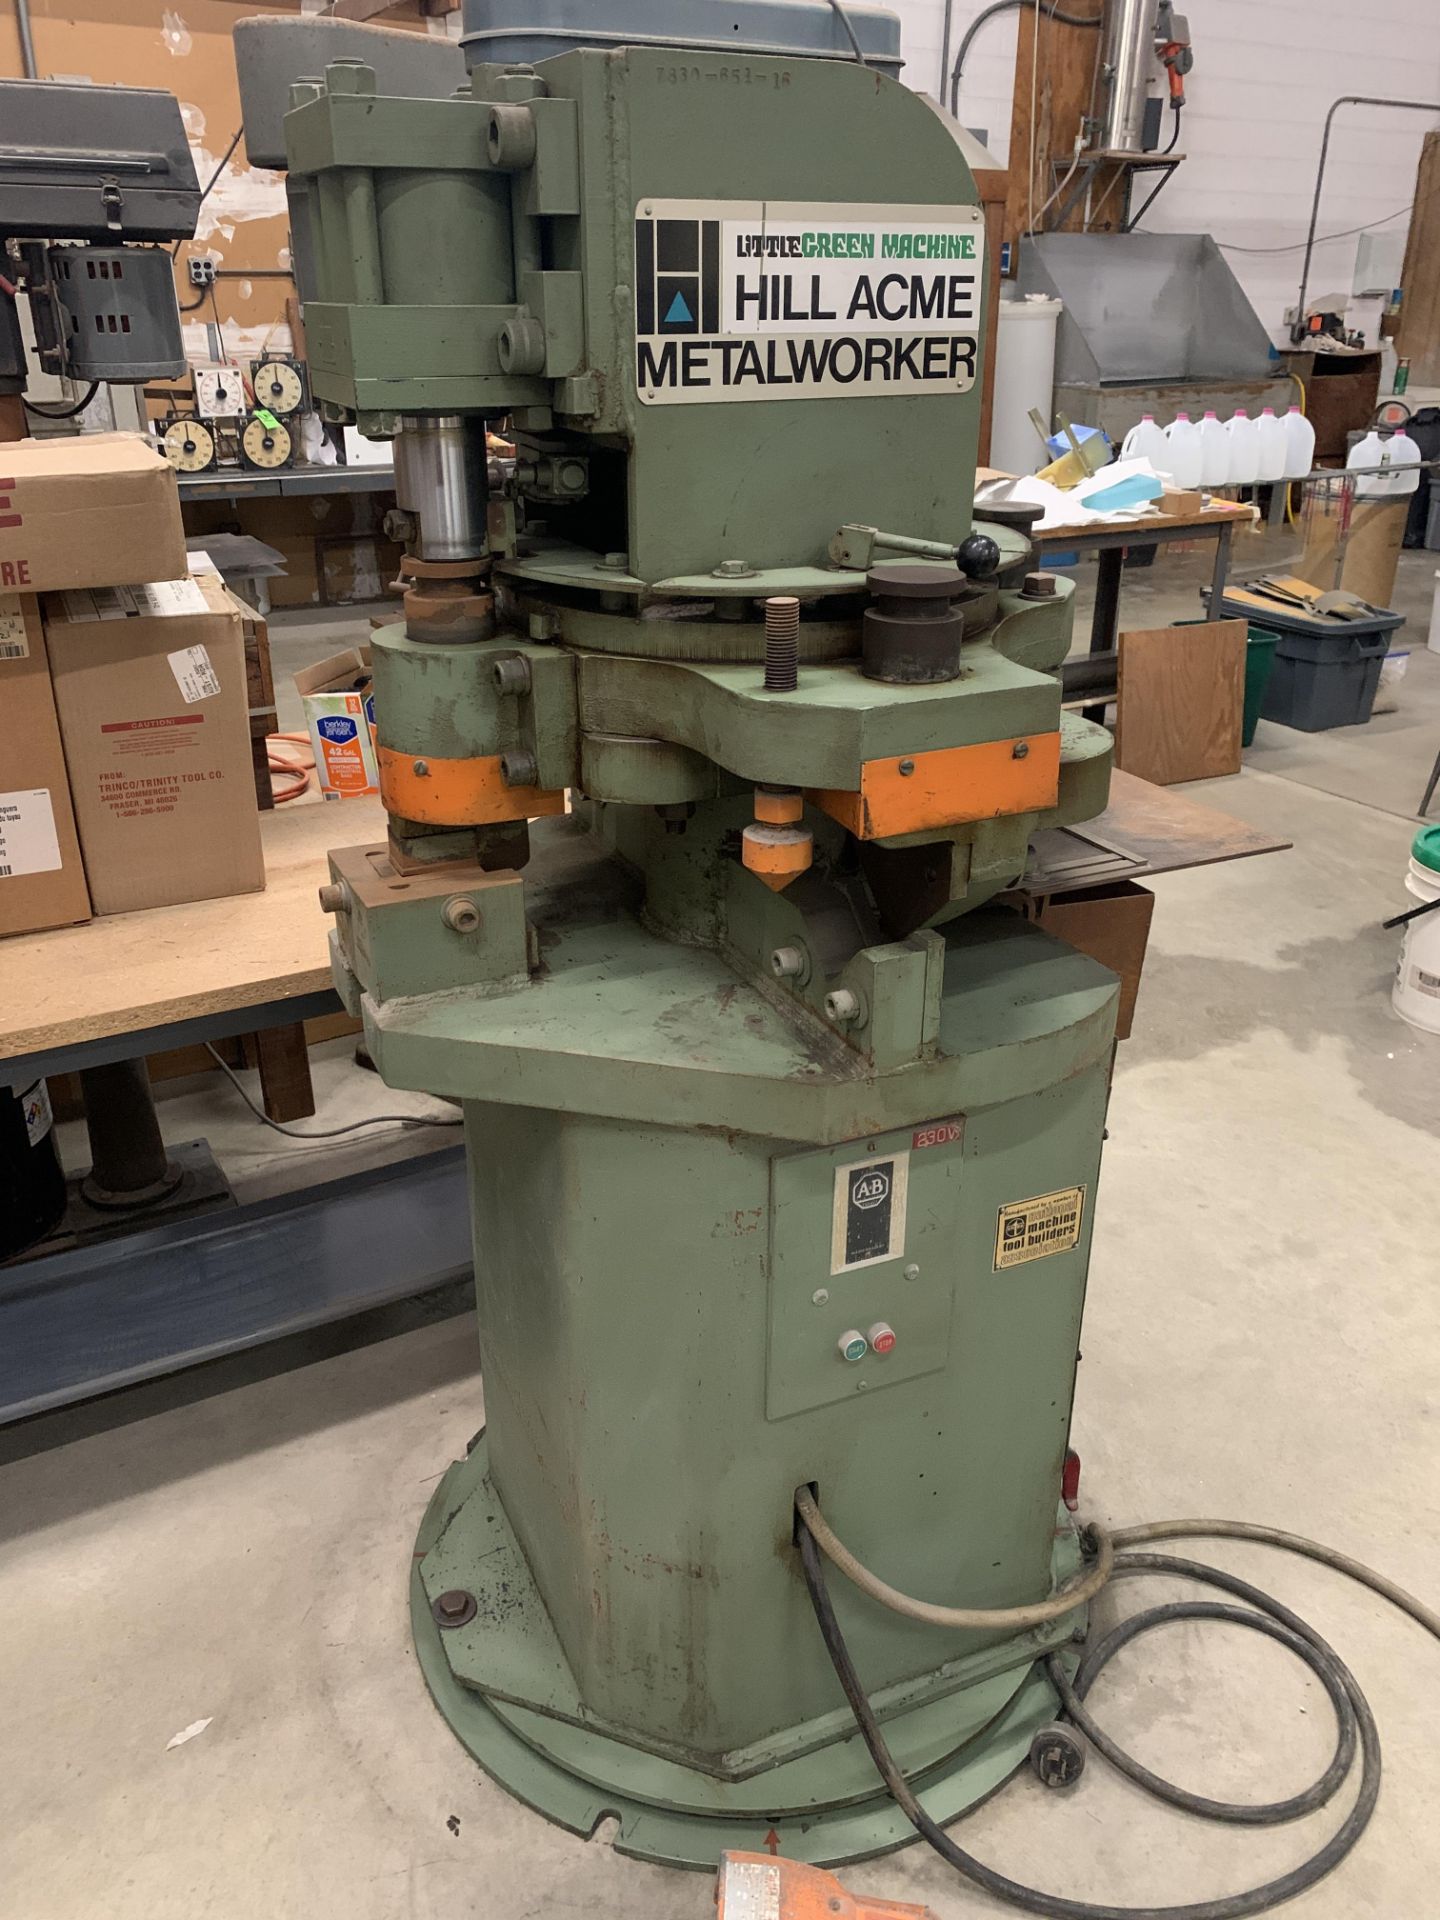 HILL ACME 30 Ton Metalworker w/ Punch Dies